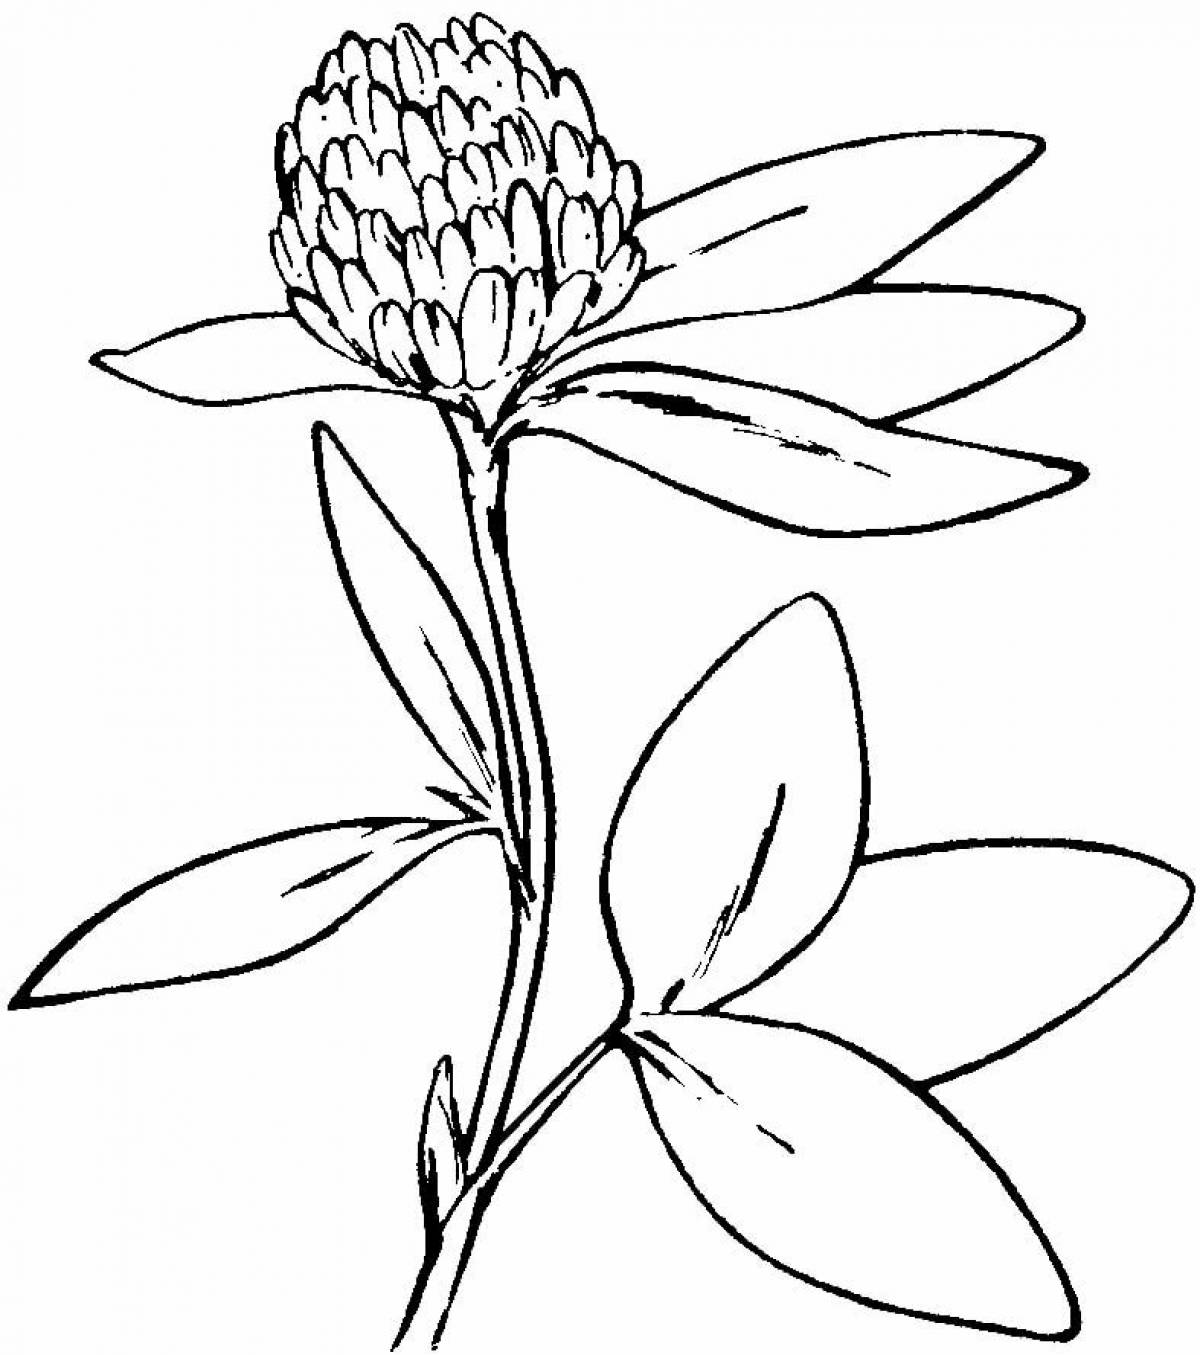 Clover coloring page